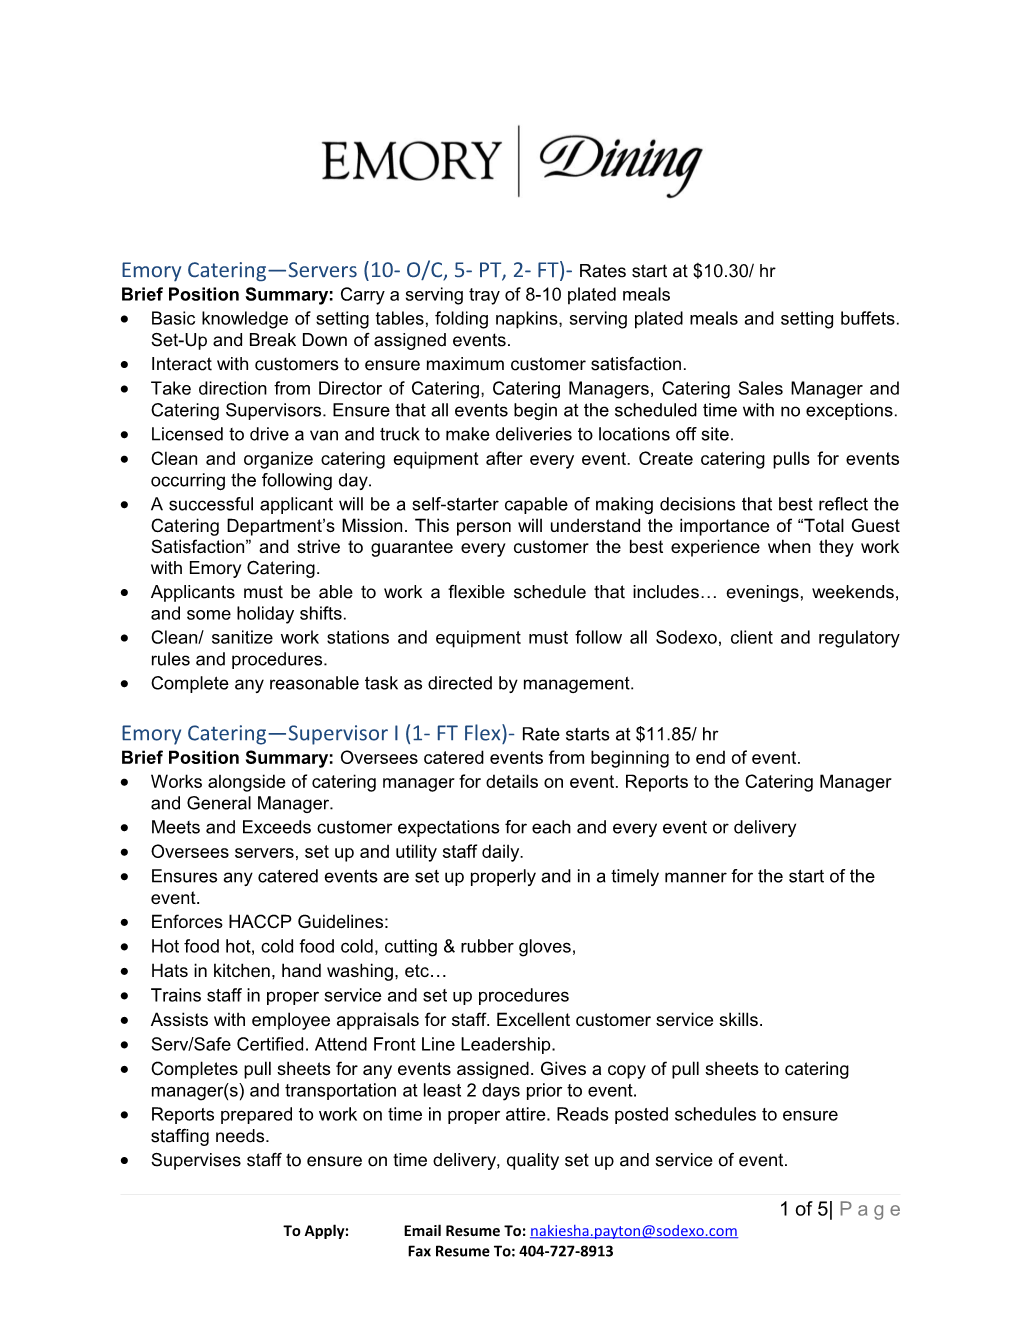 Emory Catering Servers (10- O/C, 5- PT, 2- FT)- Rates Start at $10.30/ Hr